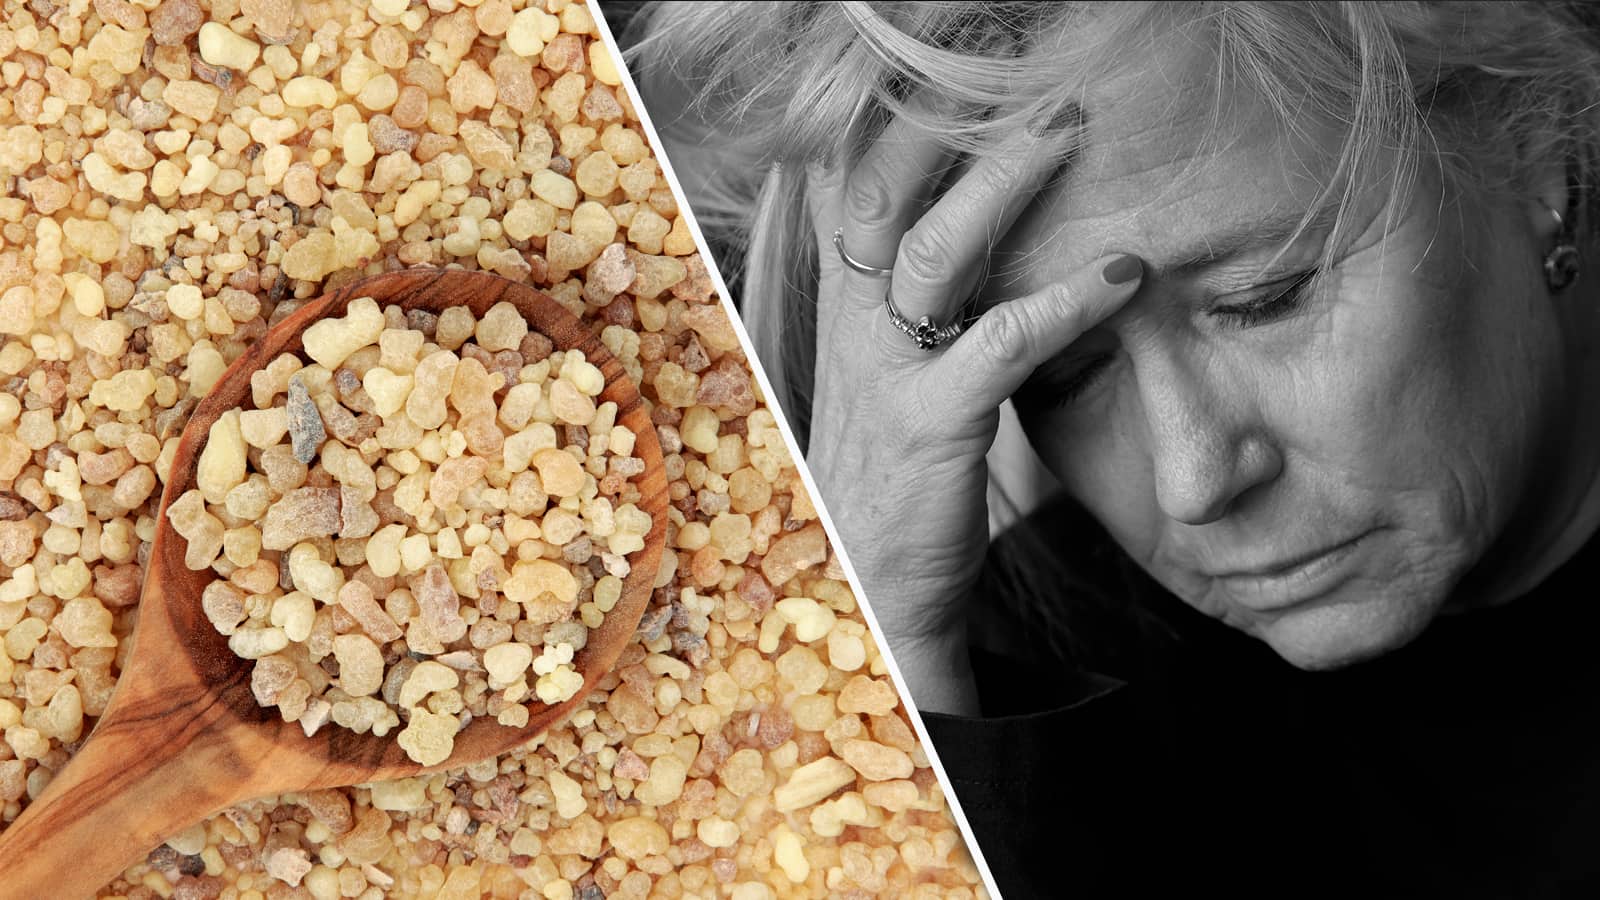 Researchers Reveal How Frankincense Can Relieve Depression and Anxiety